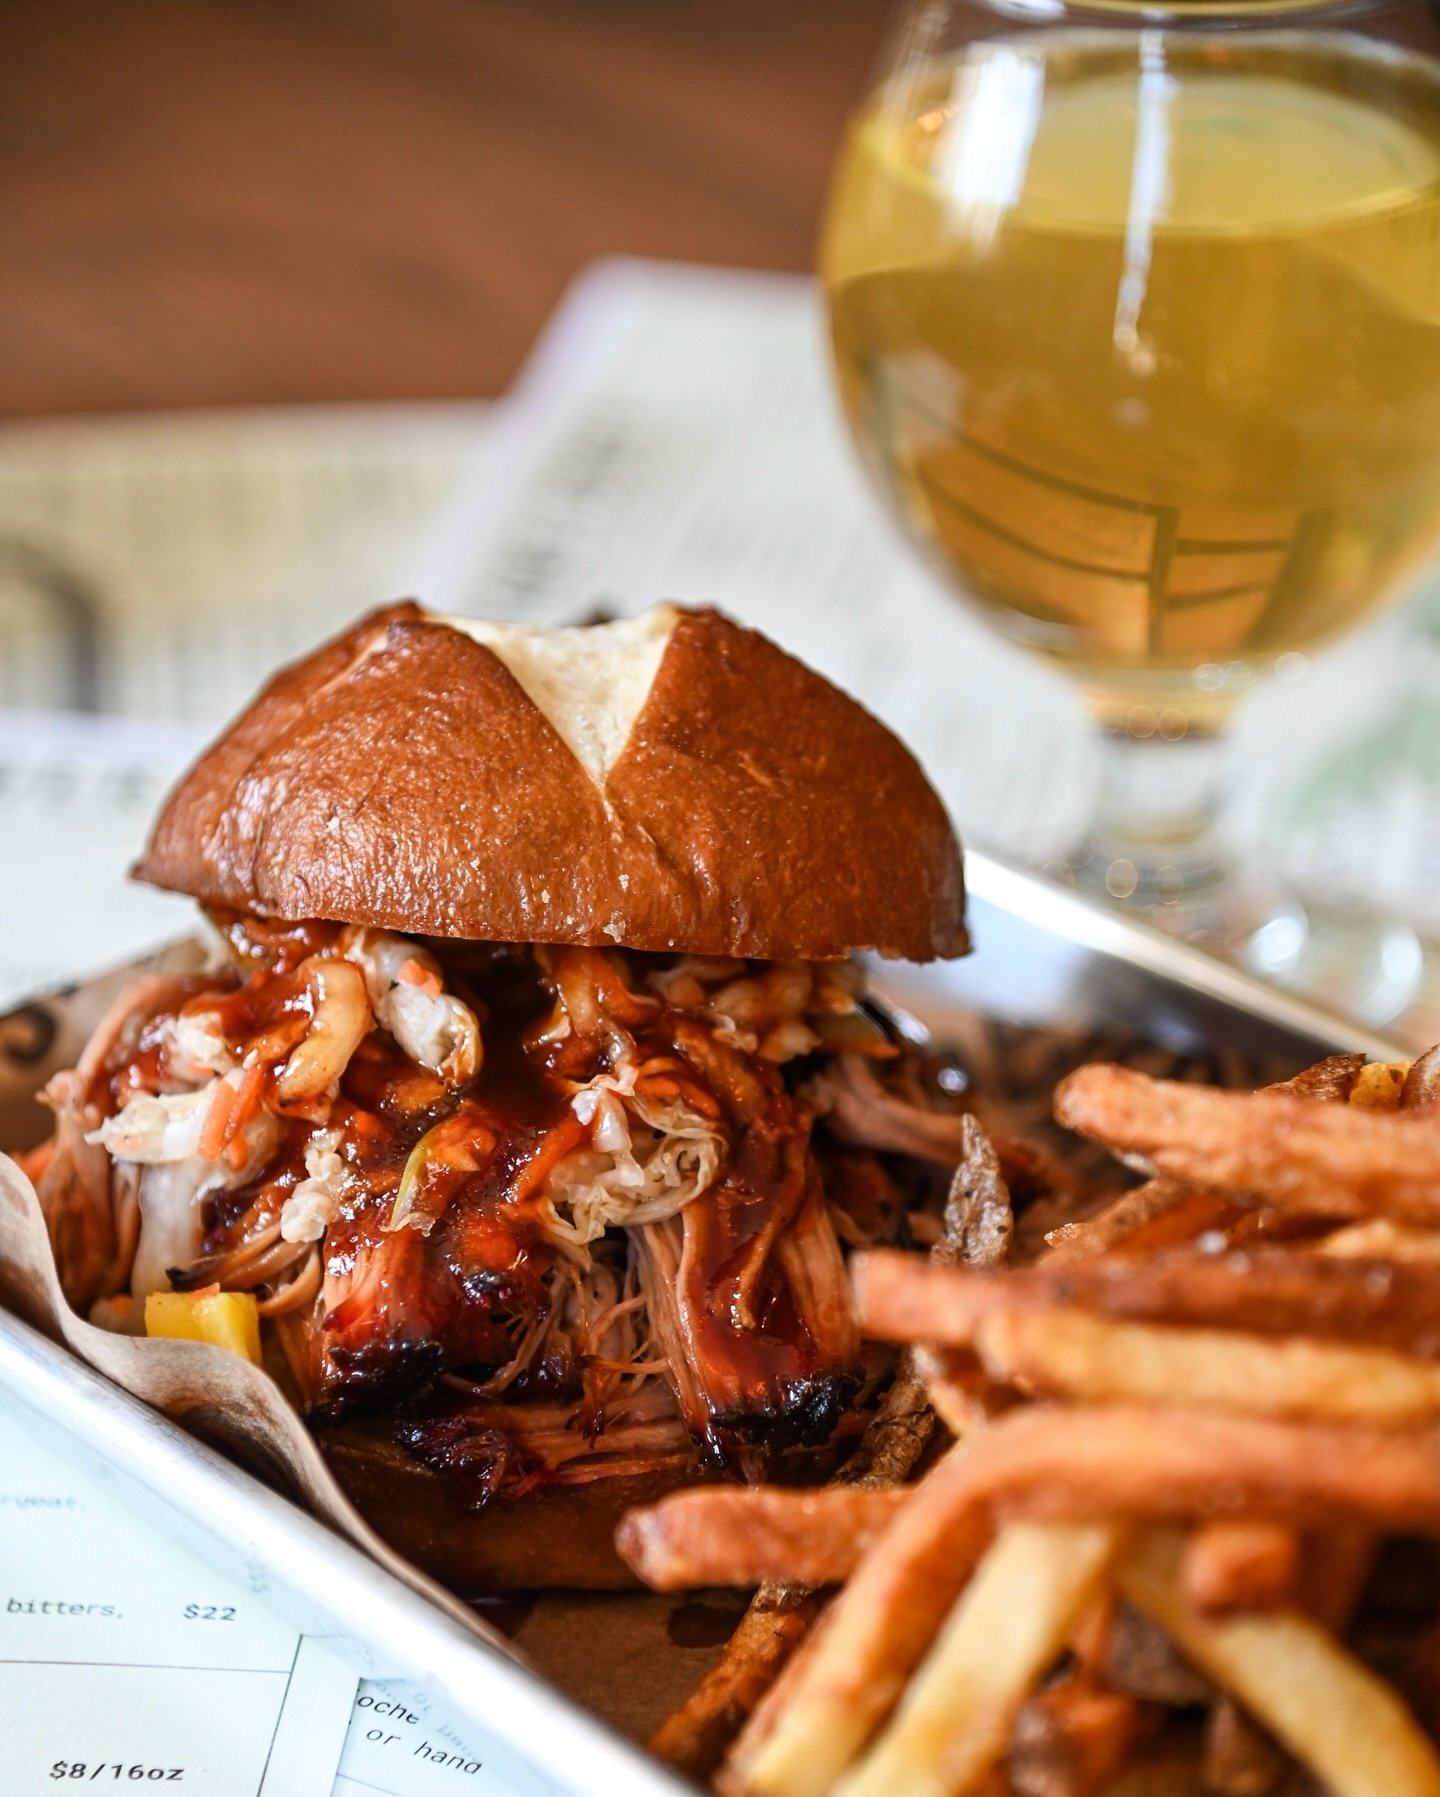 Did you know we smoke our BBQ meats over local Vermont Cherry &amp; Apple wood? Low N&rsquo; Slow, always!🔥🔥

Our Pulled Pork Sandwich includes our slow-smoked pulled pork, topped with house-made slaw, pickled pineapple and Shakedown BBQ sauce + se